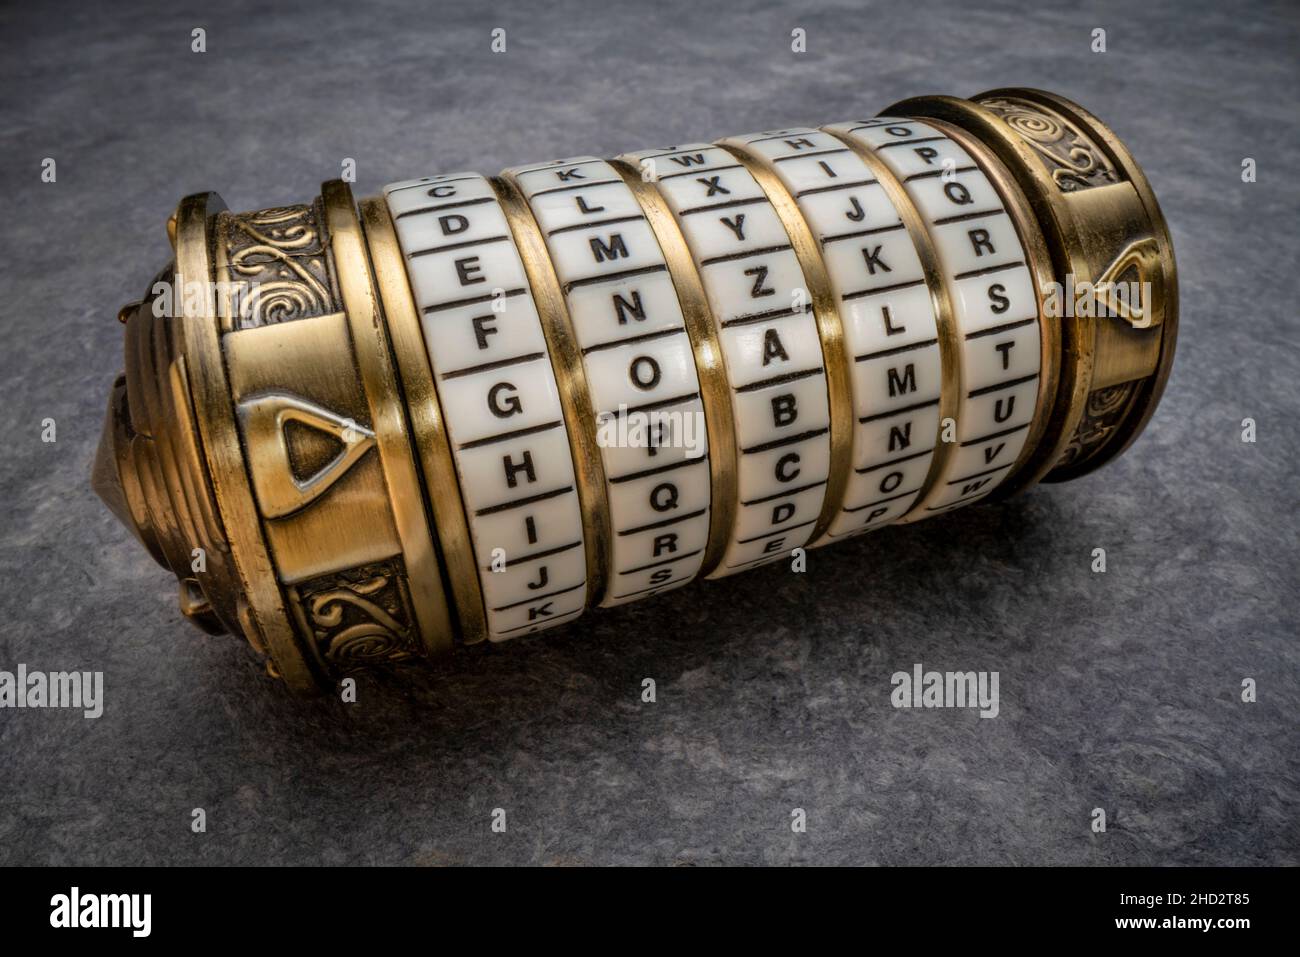 goals word as a password to combination puzzle box with rings of letters, cryptography and goal setting concept Stock Photo